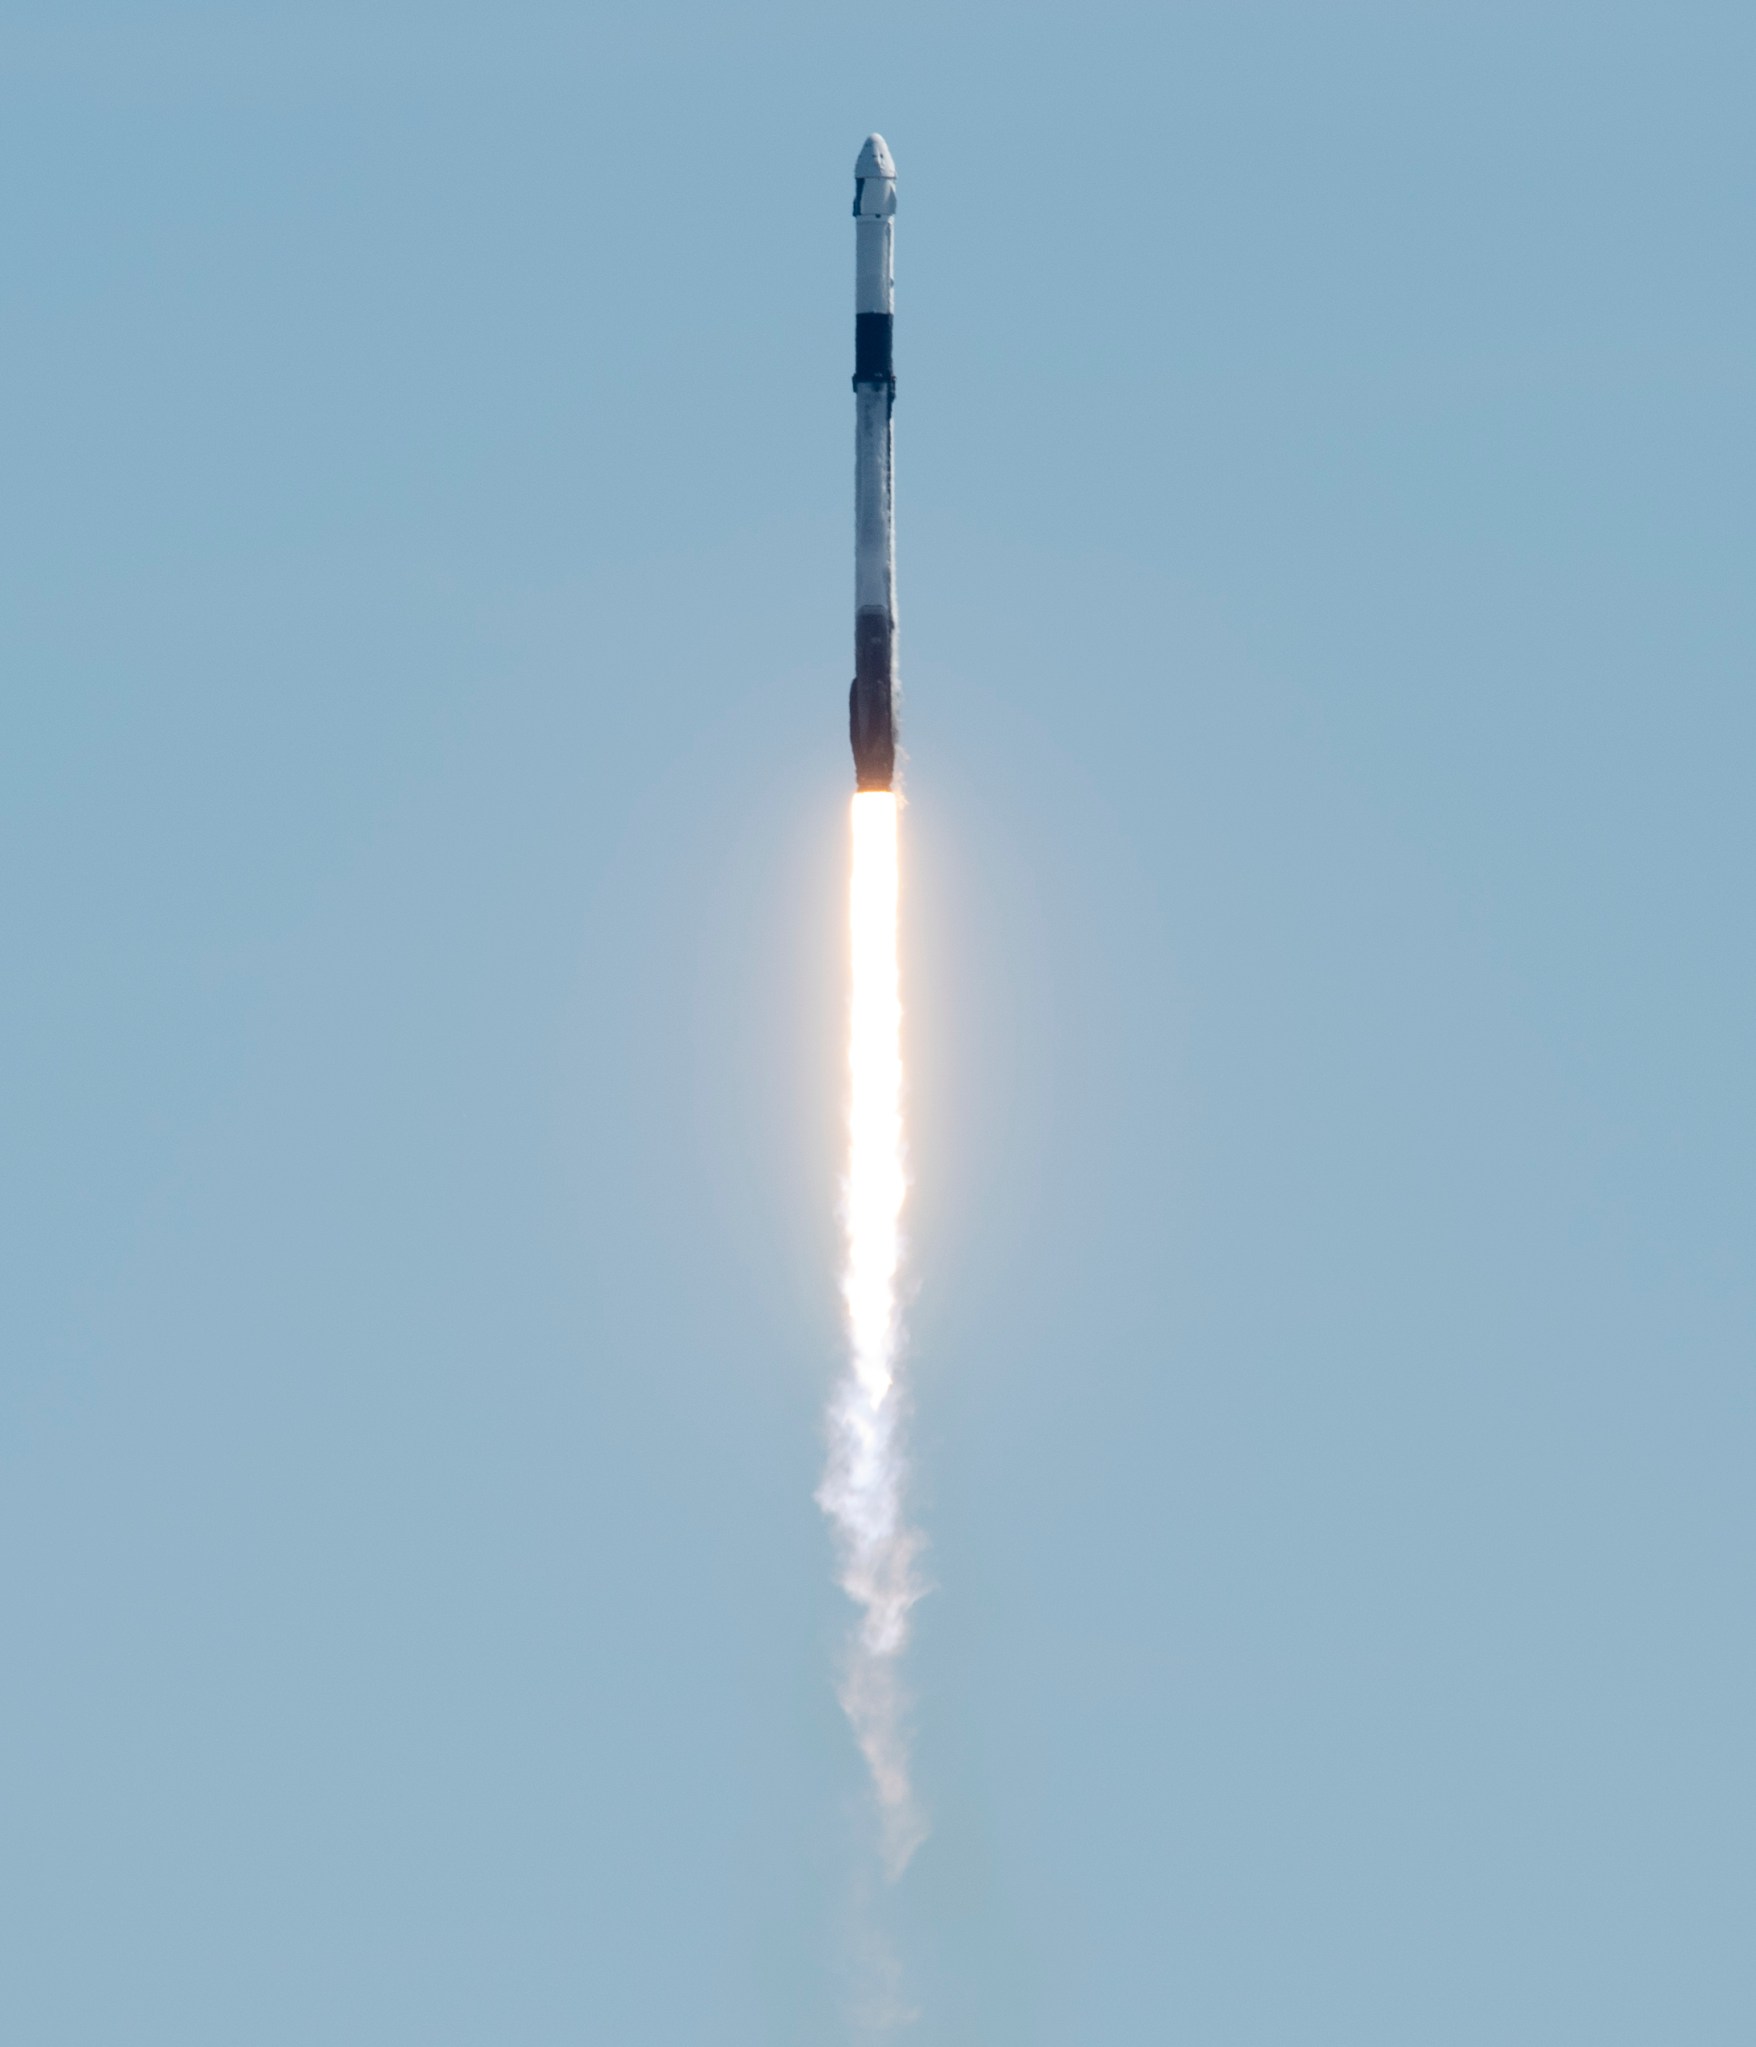 A SpaceX Falcon 9 rocket carrying the company's Crew Dragon spacecraft launches Friday, April 8, 2022, at NASA’s Kennedy Space Center in Florida.